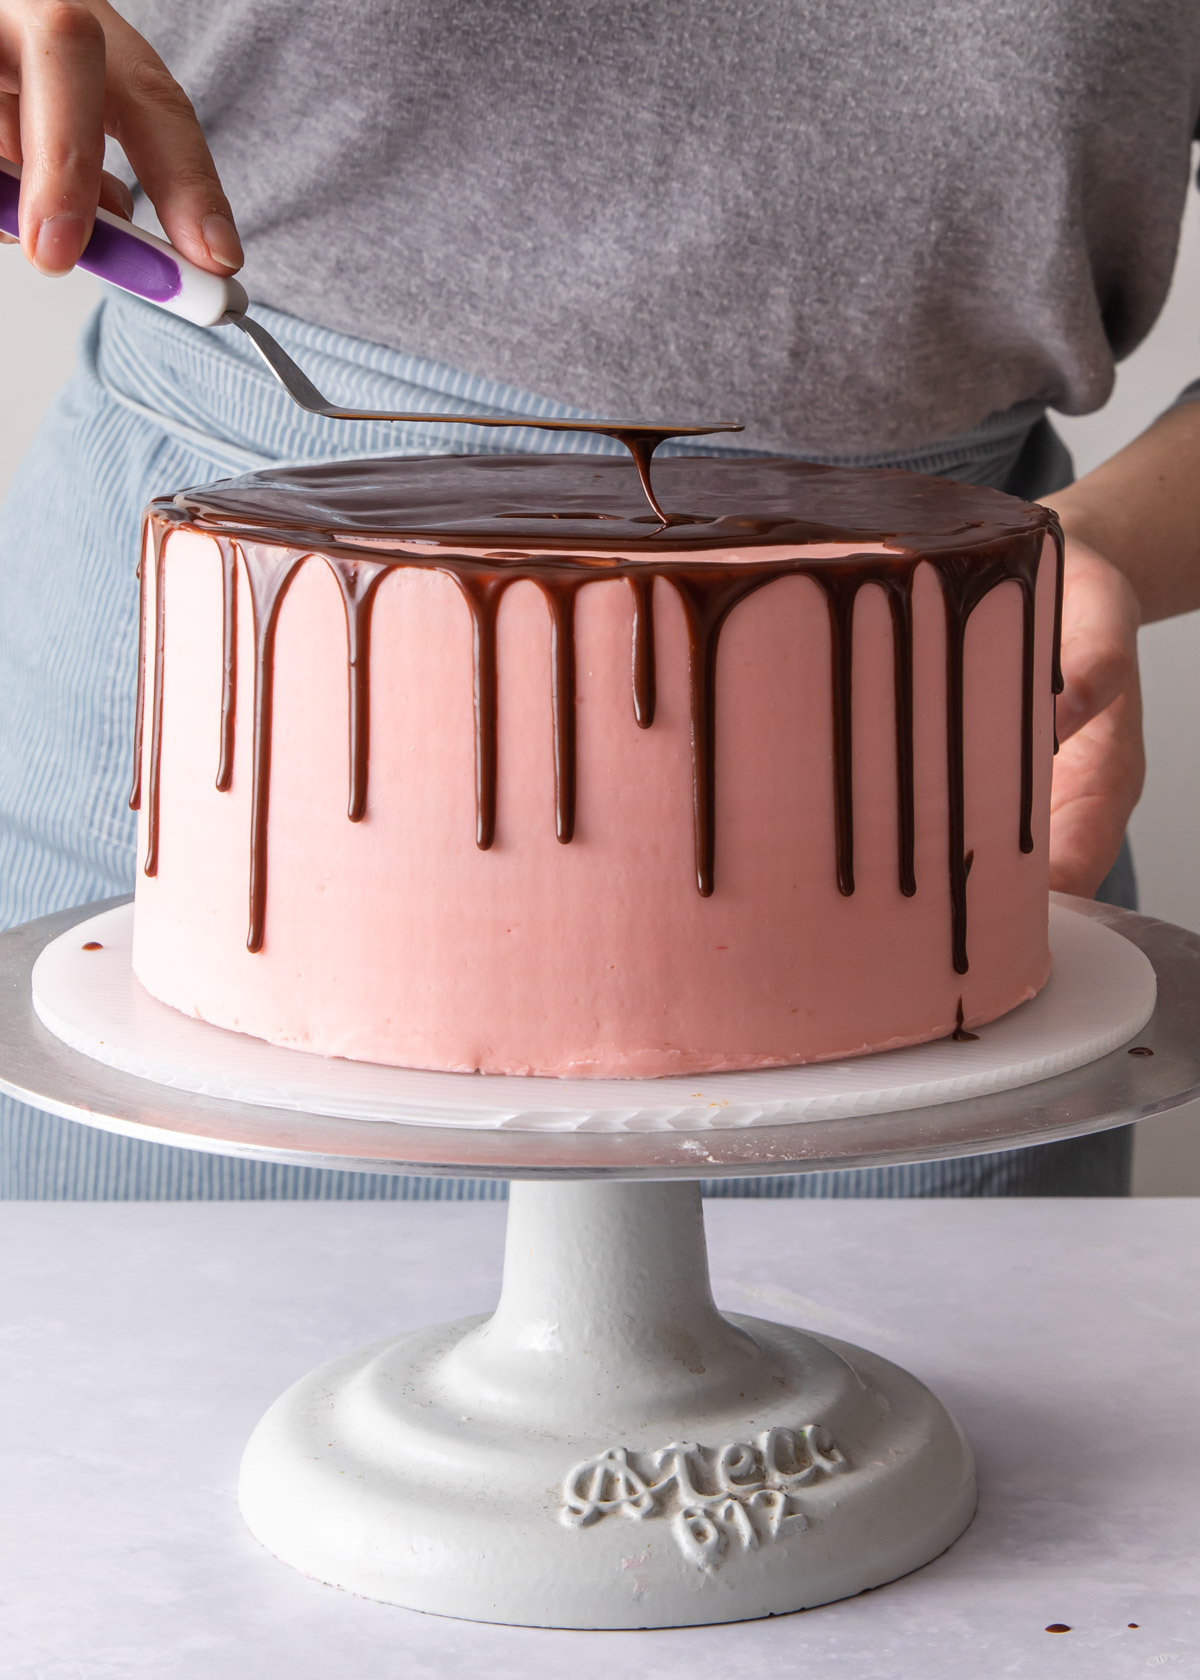 Smoothing out chocolate glaze with an offset spatula